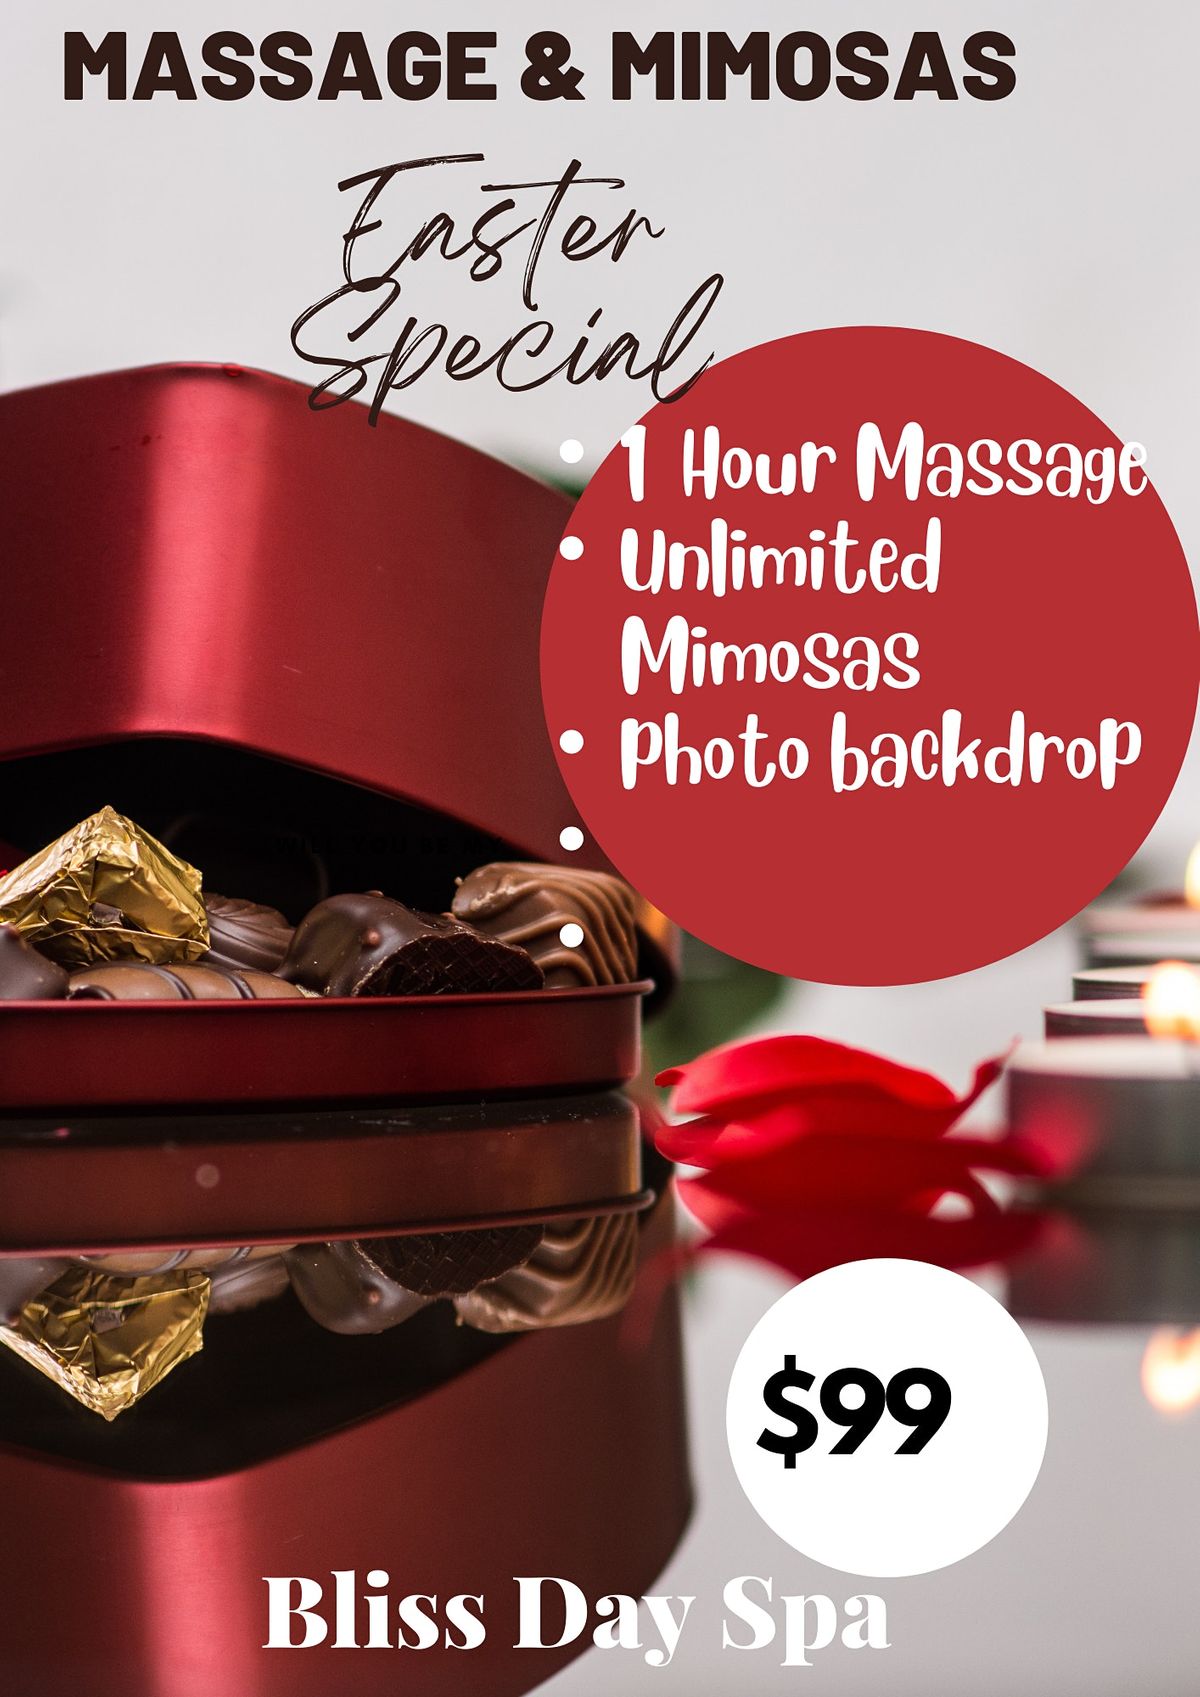 MASSAGE & MIMOSAS BY BLISS DAY SPA